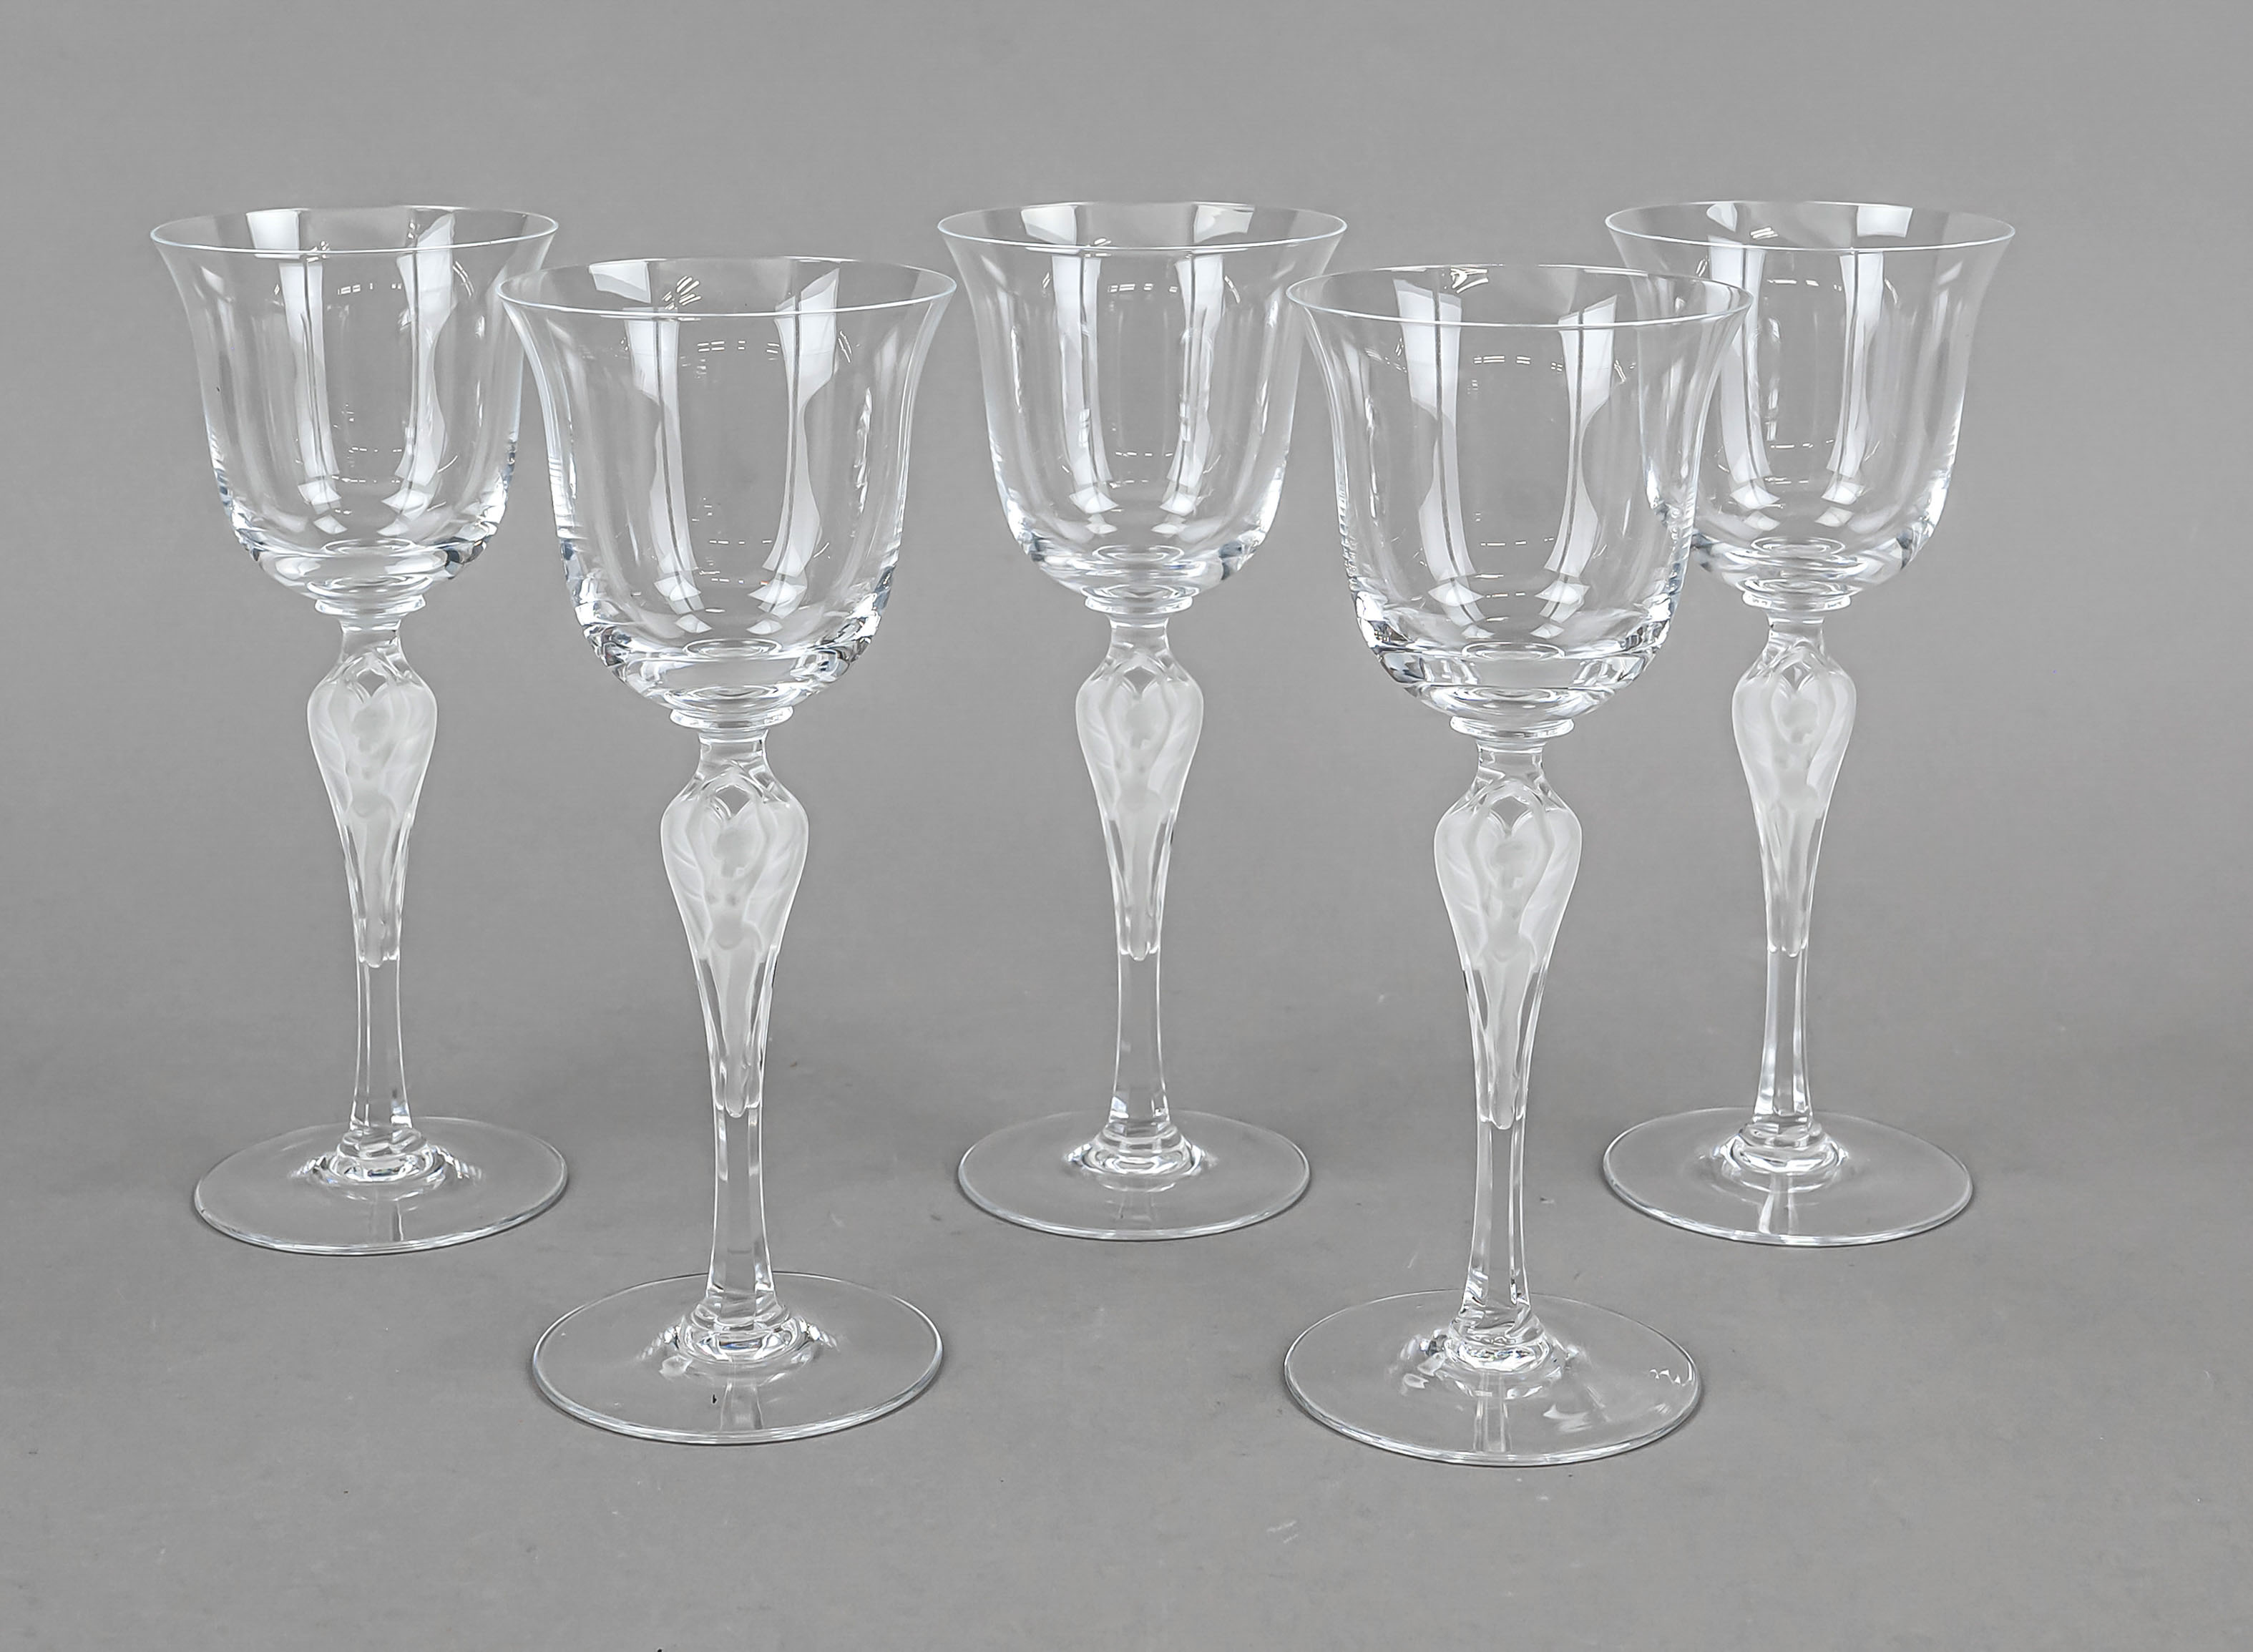 Five wine goblets, 2nd half 20th century, Igor Carl Fabergé, design for the 100th birthday of